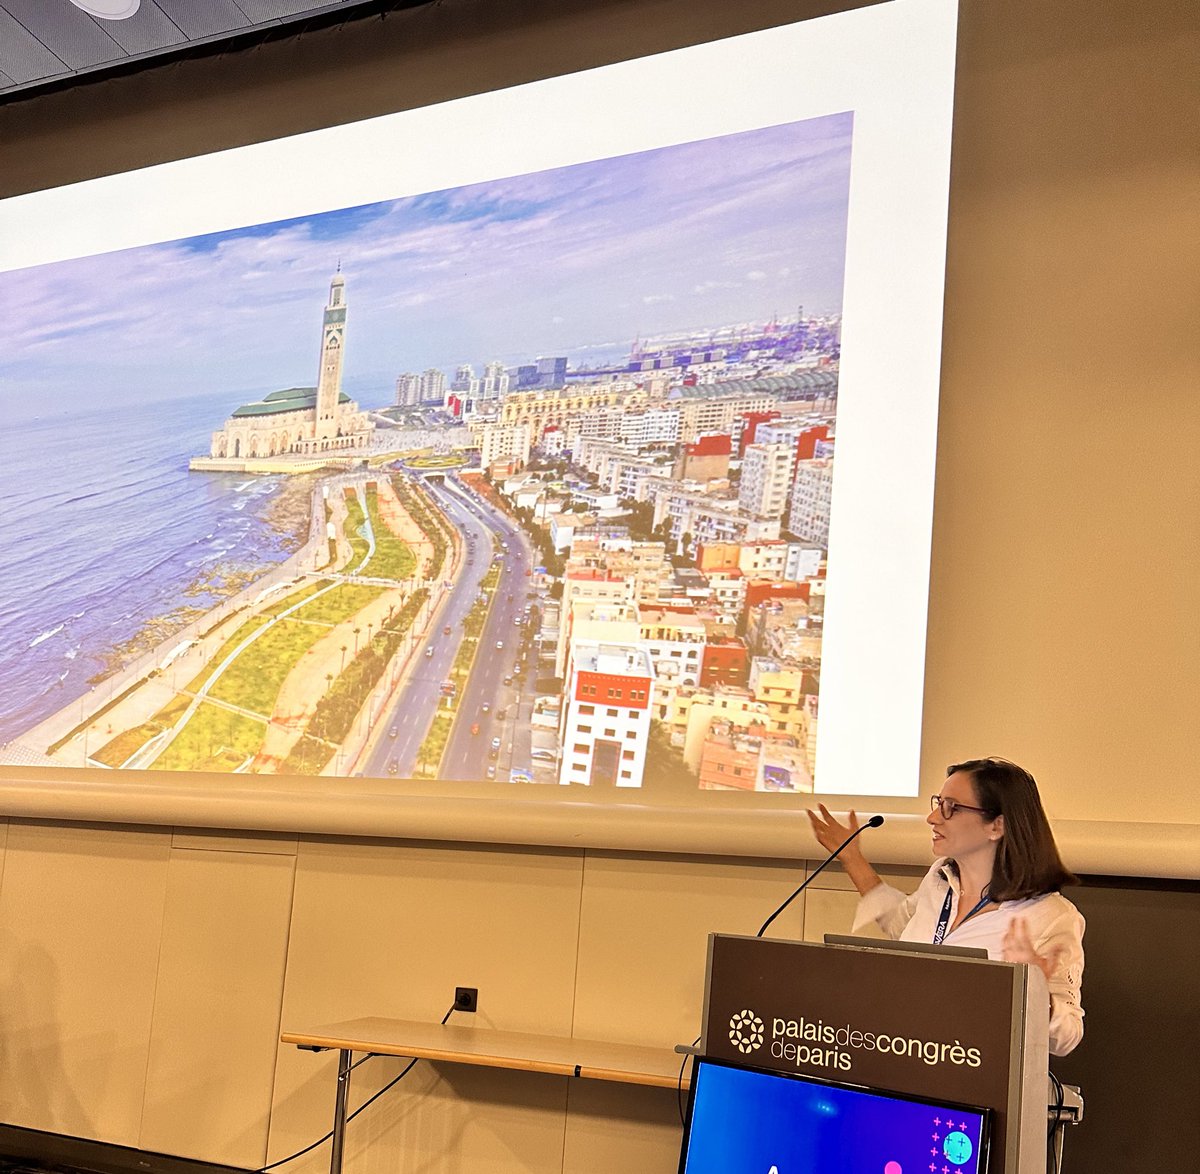 Really proud of @AfakNsiri taking last min talk about acute pain in Africa and she is showing beautiful #morocoo where we having @AFSRA10 next annual meeting in #Casablanca